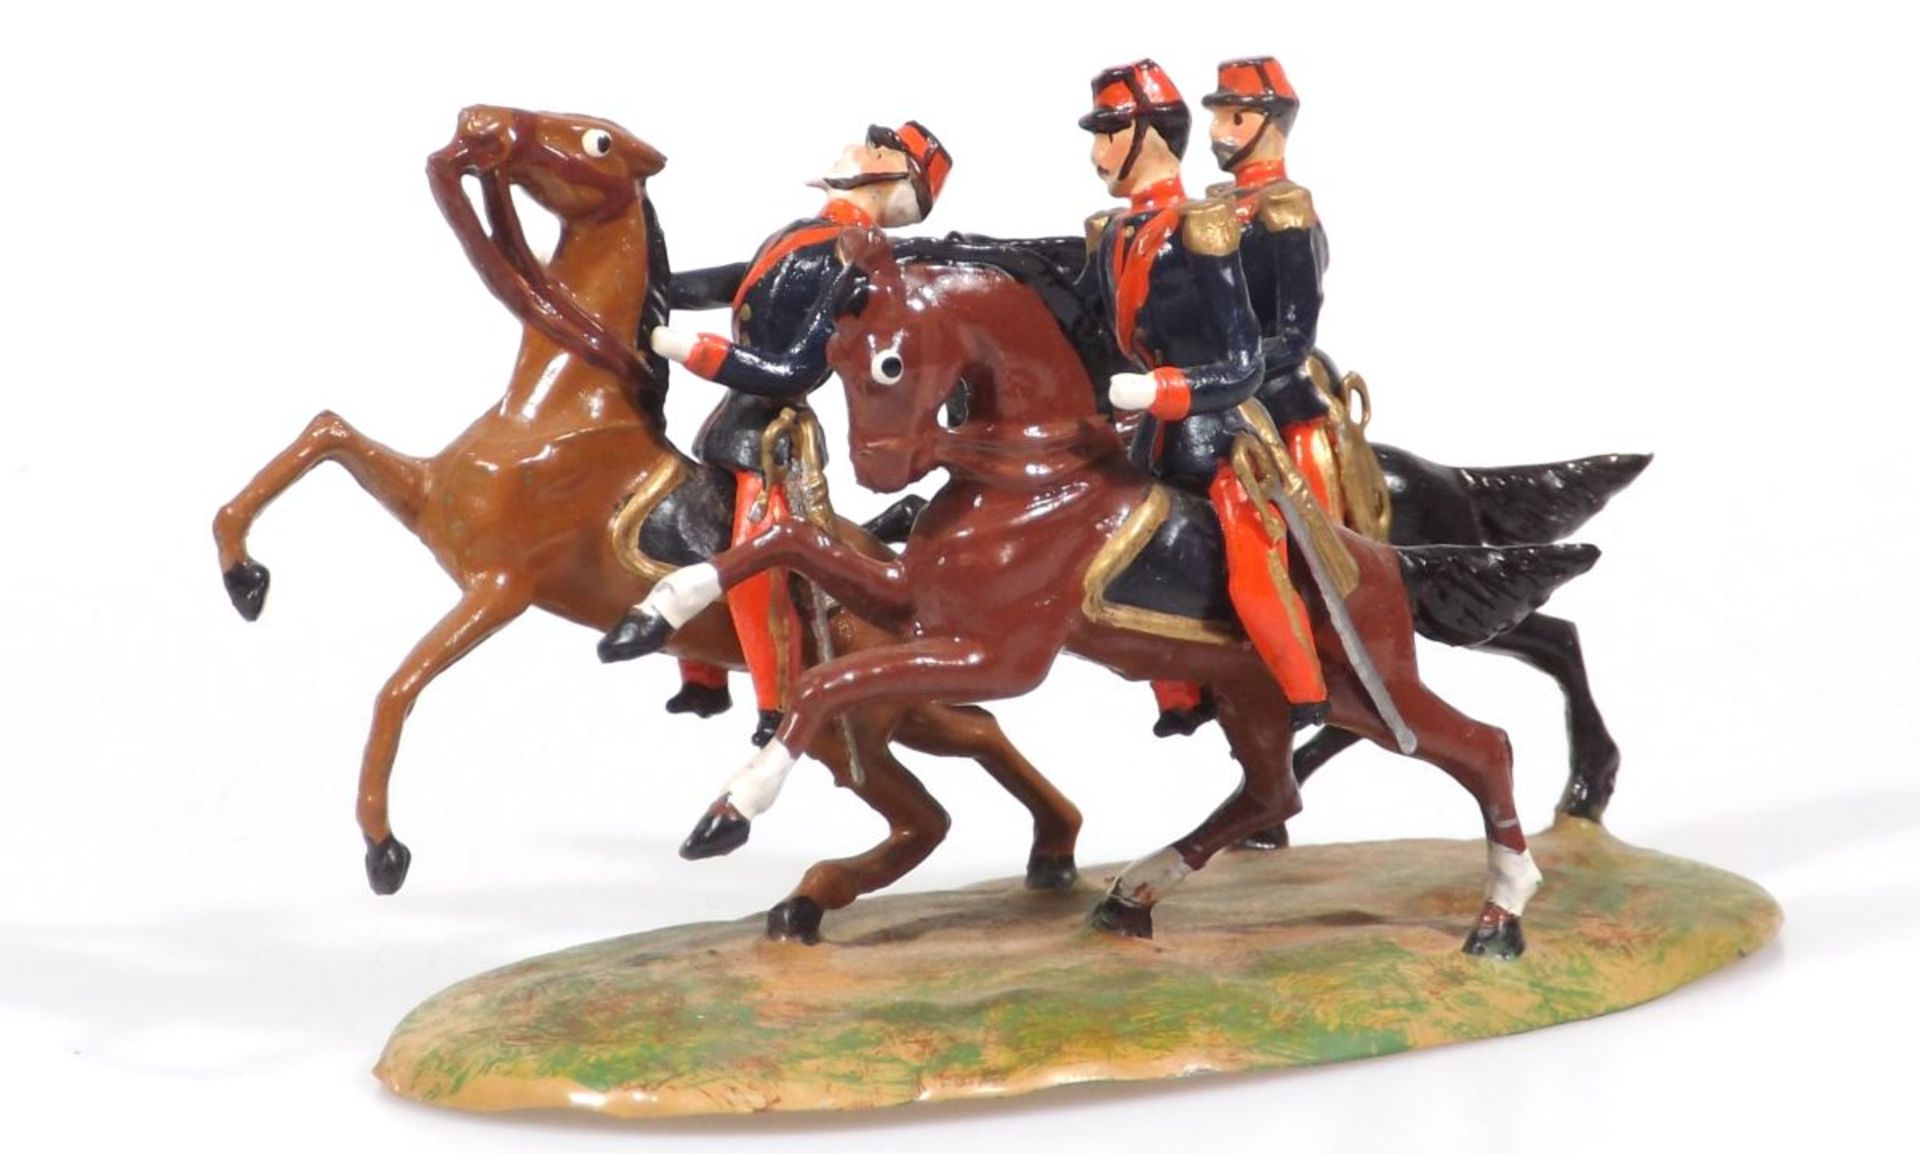 Heyde Like, tin figures, lead figures, round bosse, fully-sculptural figures, made in Germany